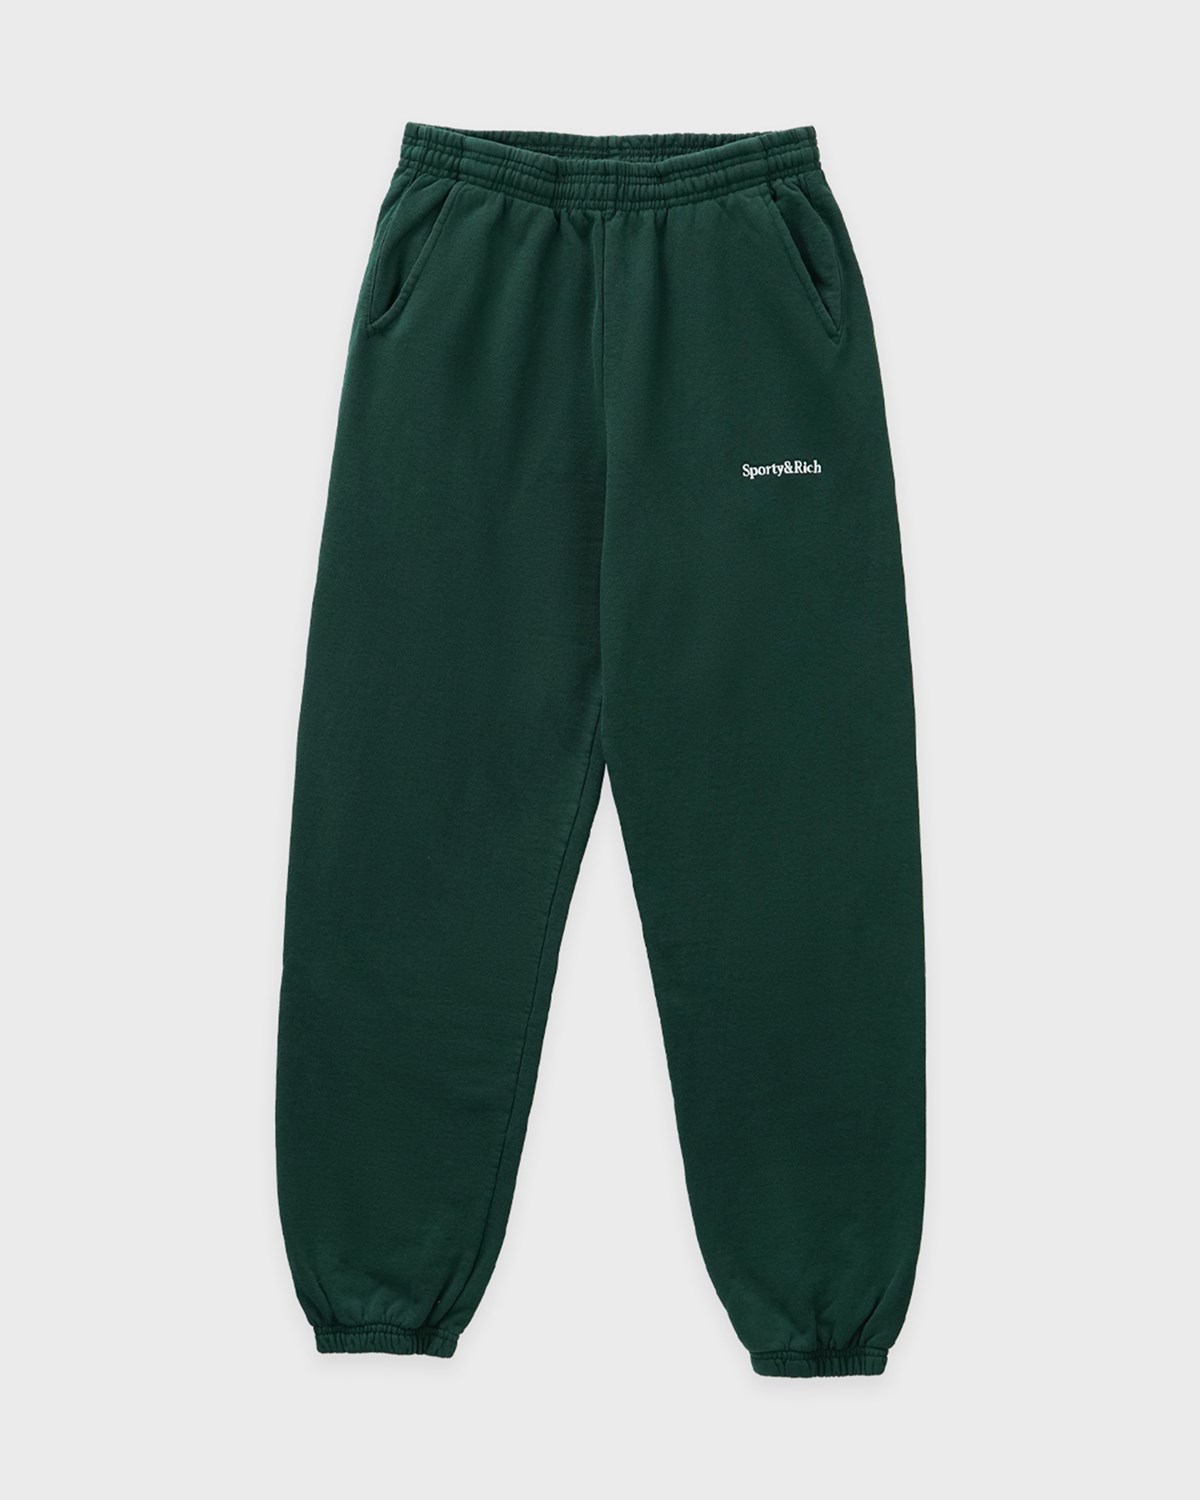 Serif Embroidered Sweatpant $134 Sporty & Rich Bottoms Sweat Pants